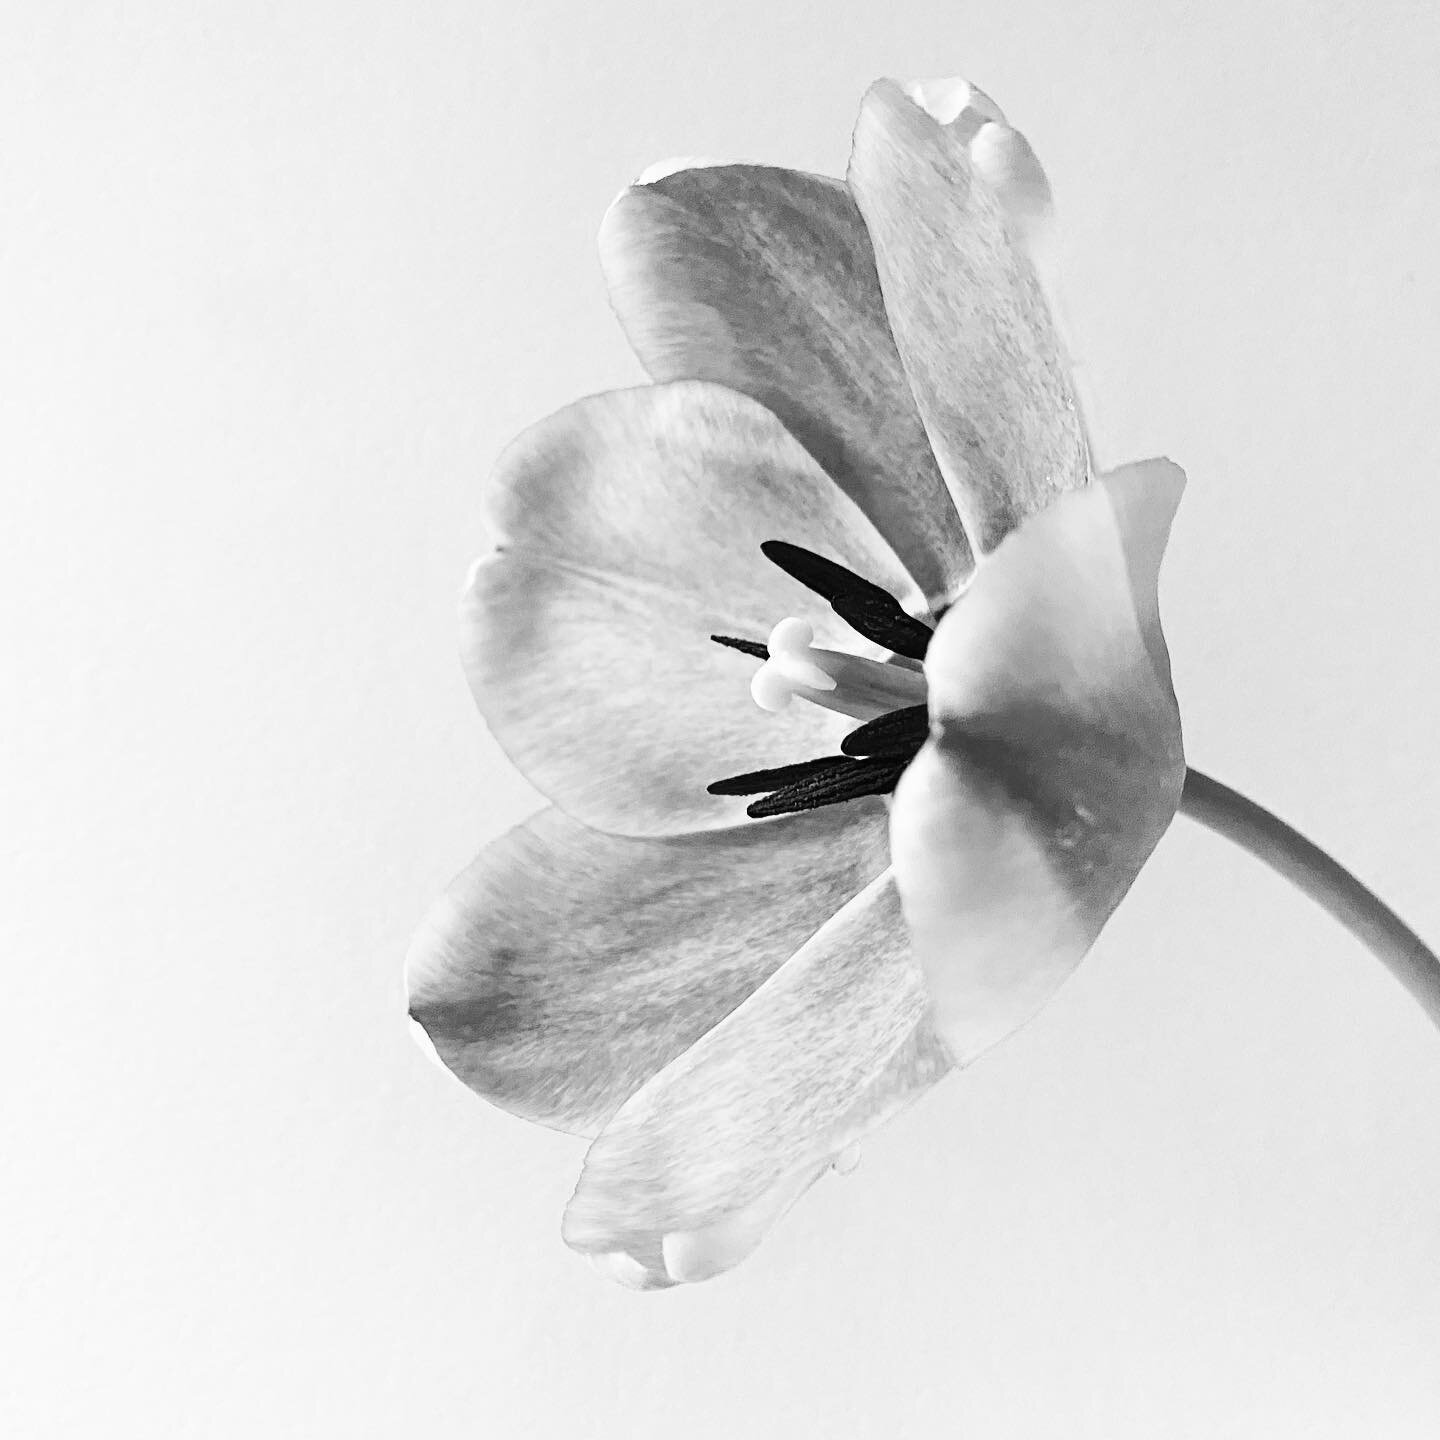 Plant Journal No. 4
Black &amp; White Series.  April 13, 2020. 
Saving Tulips from the April freeze.  The boys brought our one and only tulip in from the backyard on my birthday. She&rsquo;s amazing to watch open and close right before our very eyes.